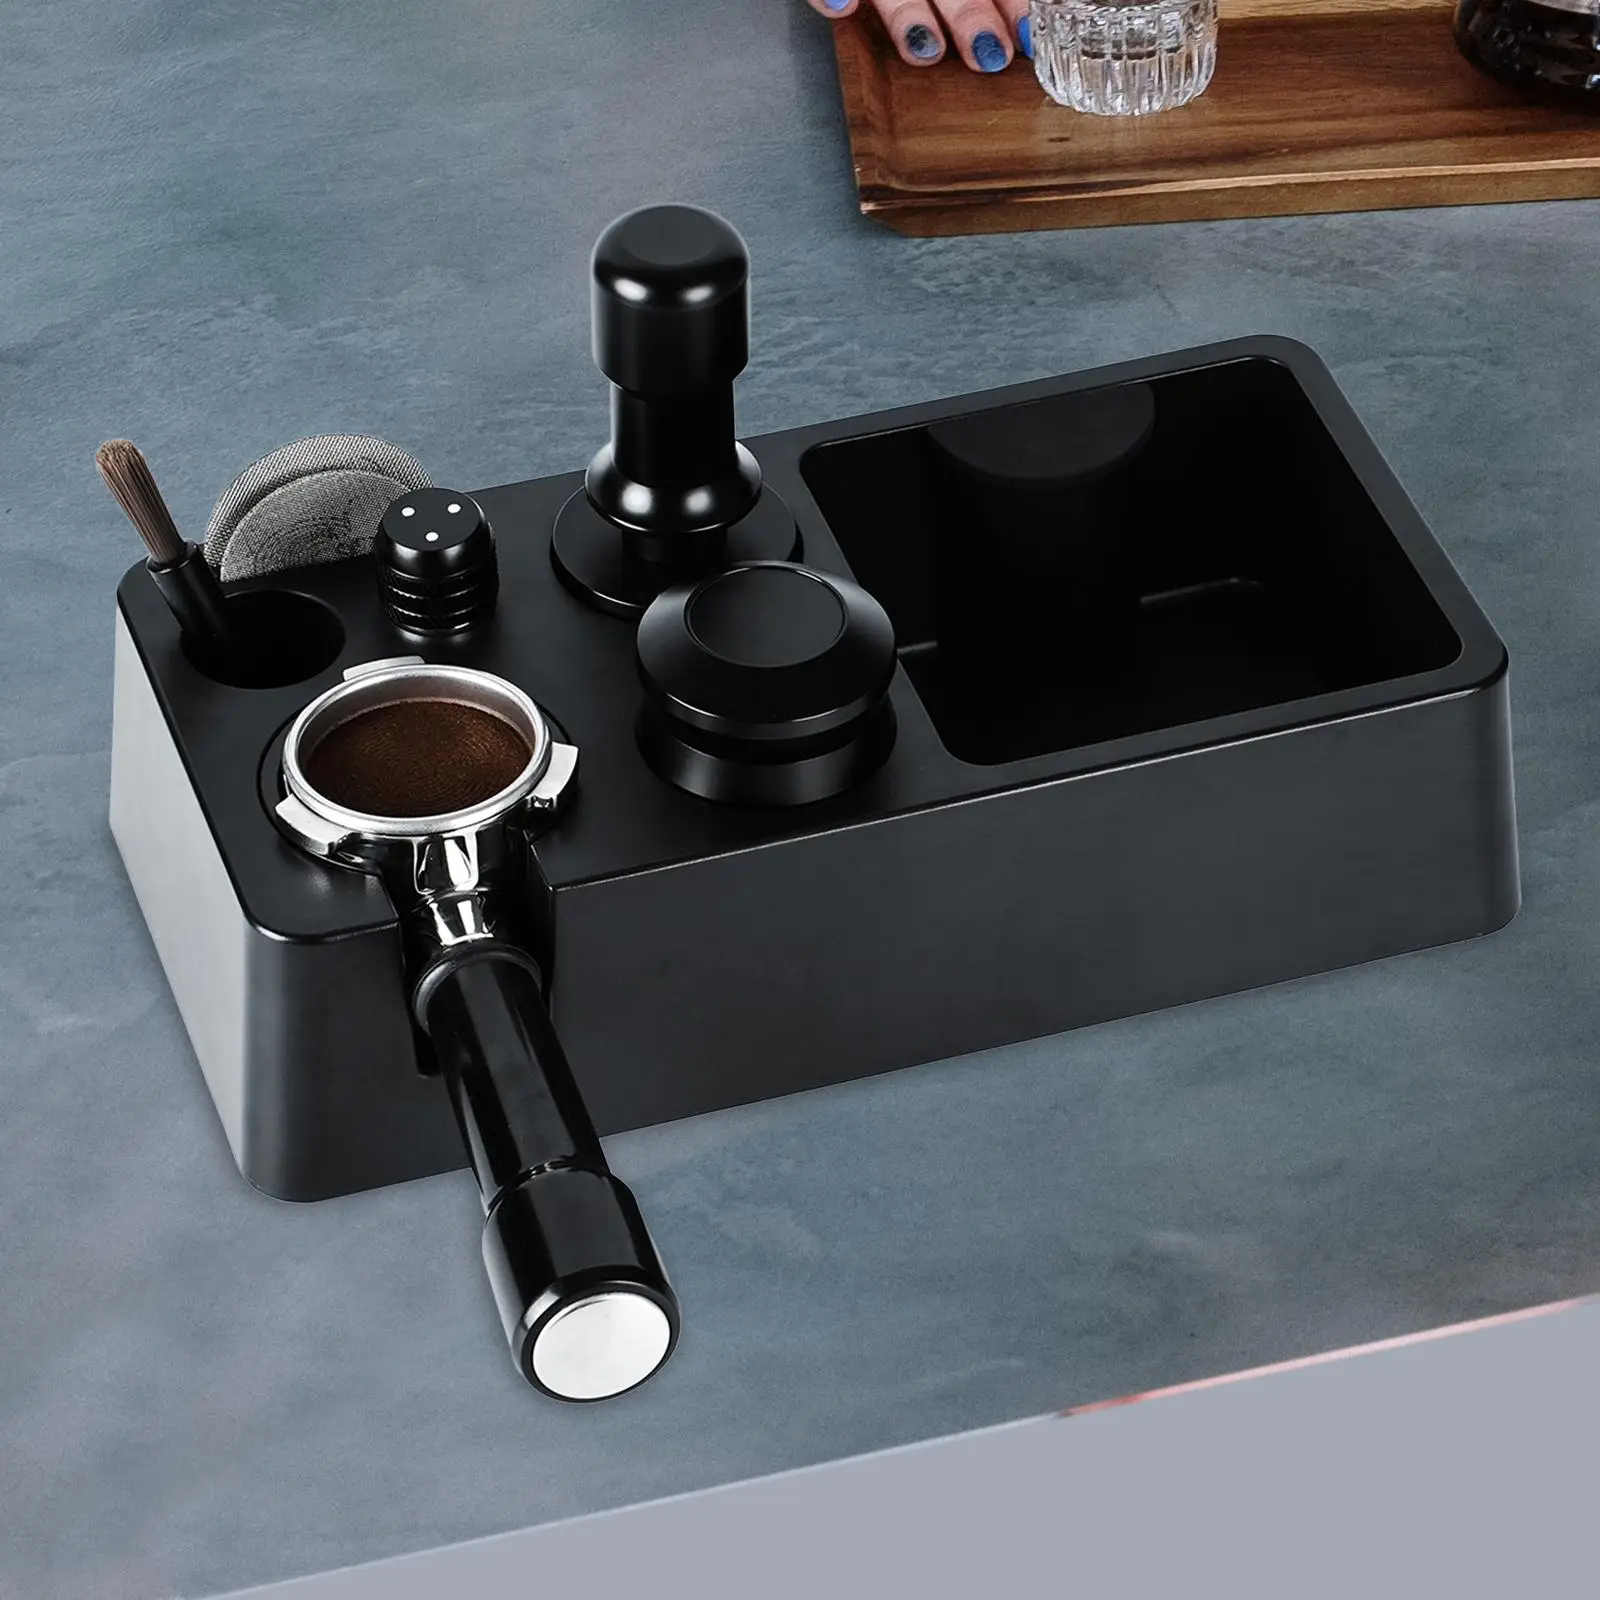 Espresso Tamper Mat Stand Multifunctional Universal Non Slip Coffee Tamper Stand for Bar Coffee Bar Home Espresso Tools Cafe